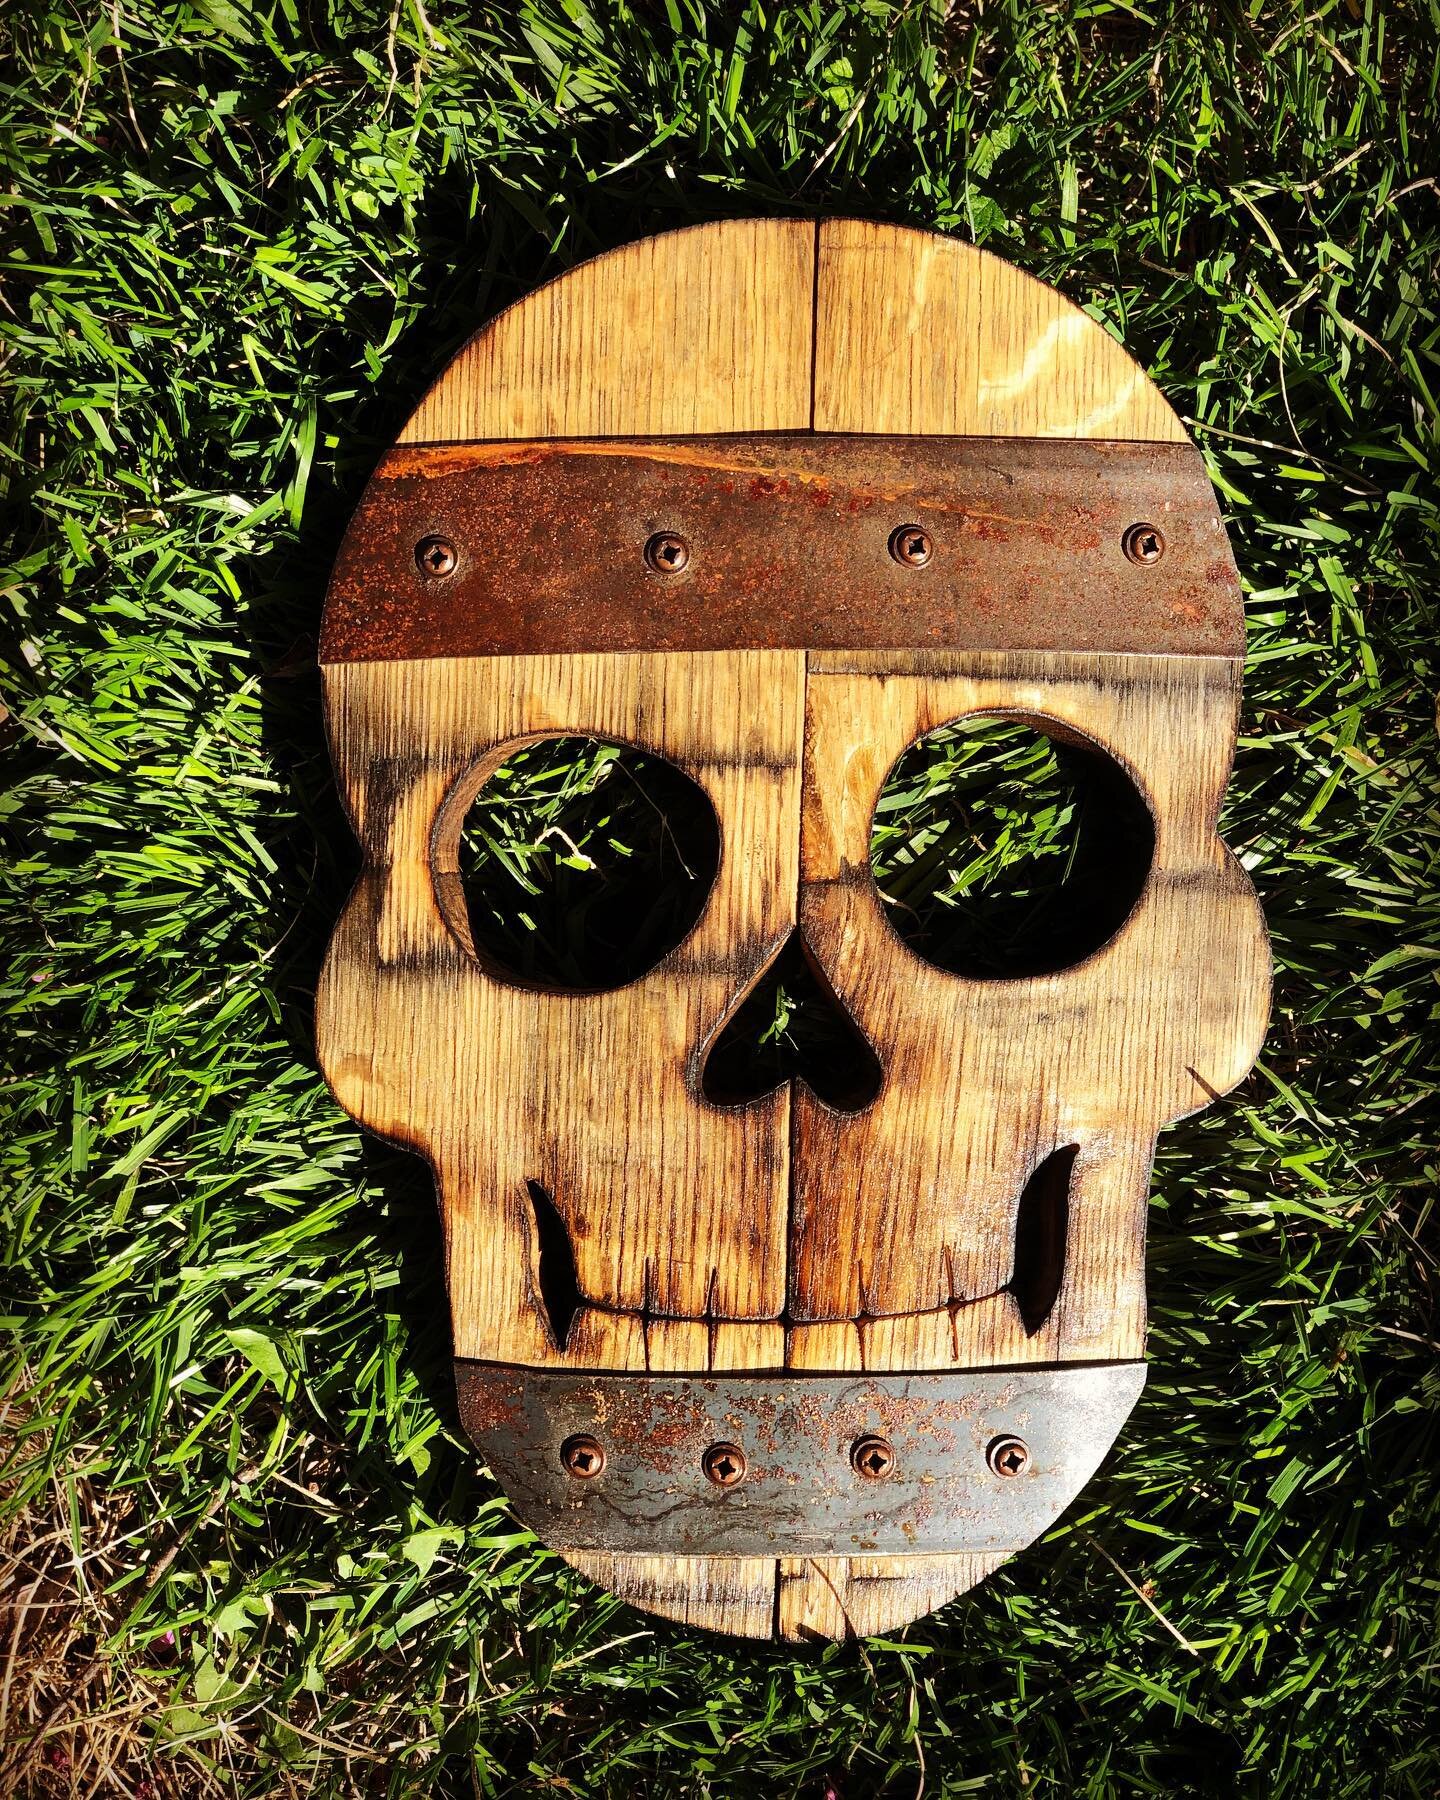 Happy Monday!  Introducing one of the newest pieces to come out of Stonewall&rsquo;s Studio. The 1&rsquo; tall bourbon barrel skull. Great for Cinco de Mayo, Halloween, or because it&rsquo;s Monday. Available on the website and our Etsy shop. As alwa